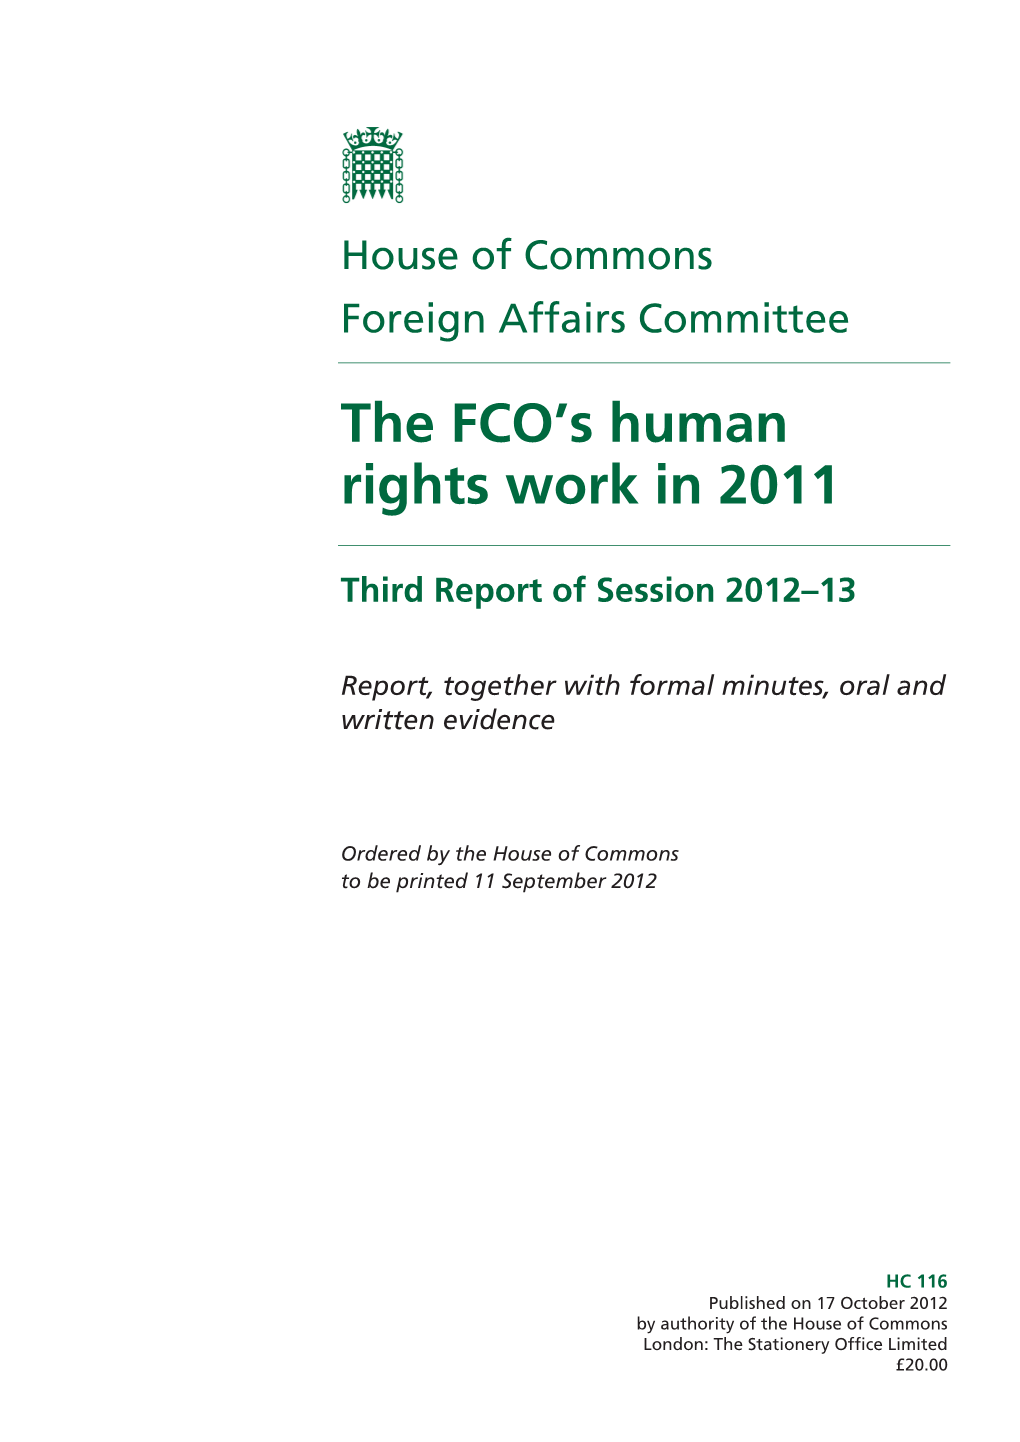 The FCO's Human Rights Work in 2011